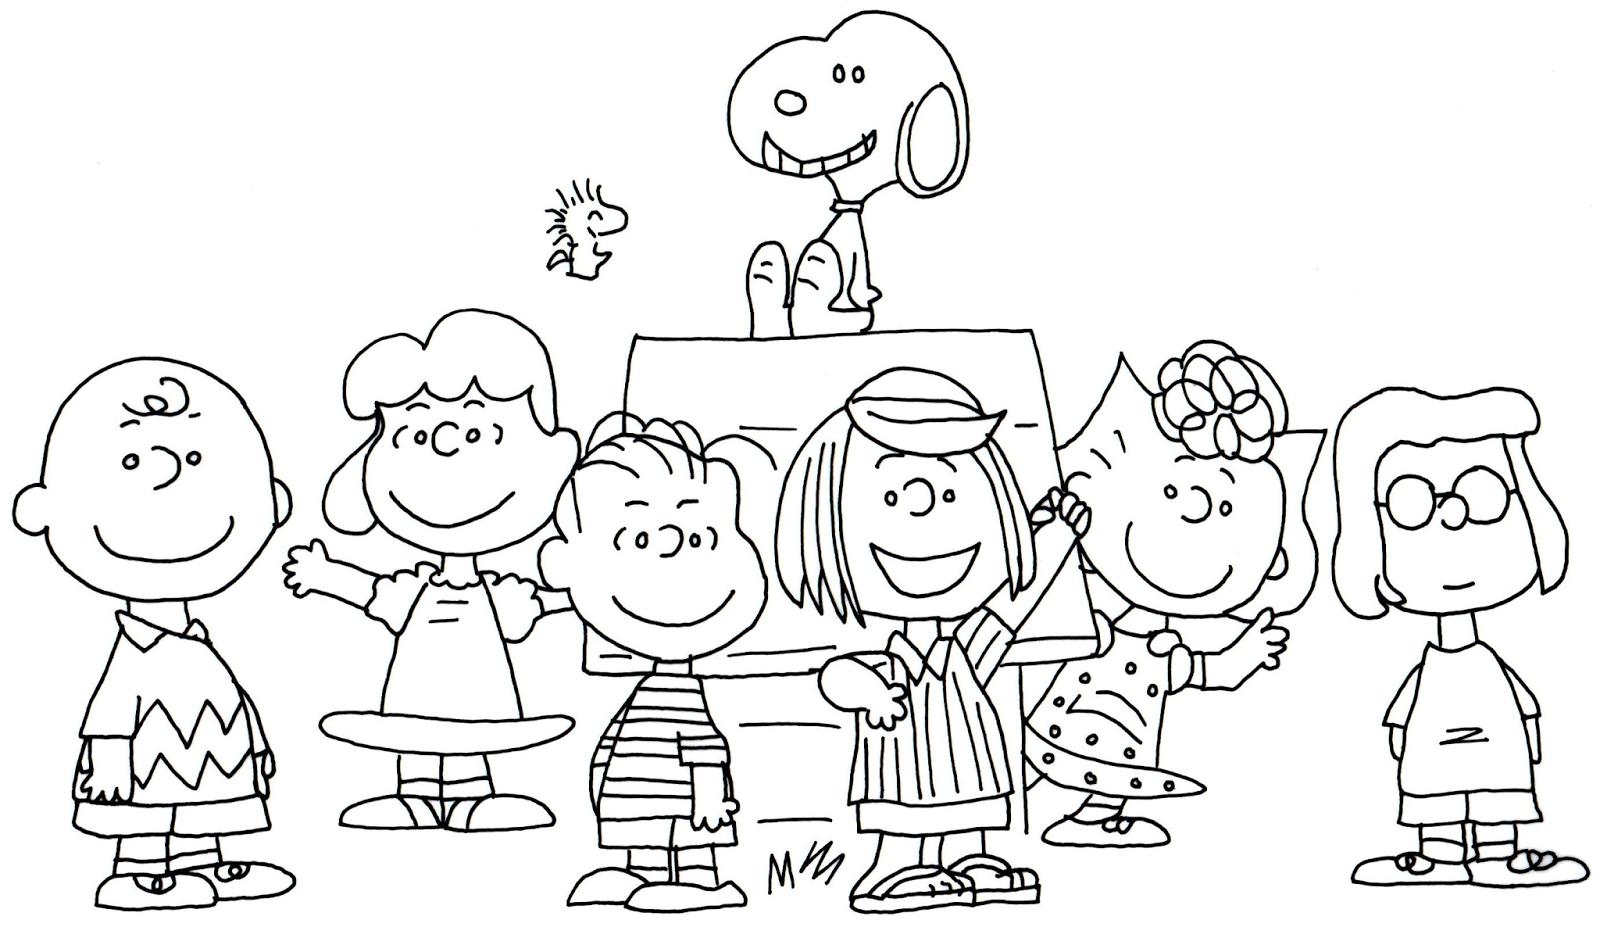 Charlie Brown And Snoopy Peanuts Coloring Page - Coloring Home1600 x 927